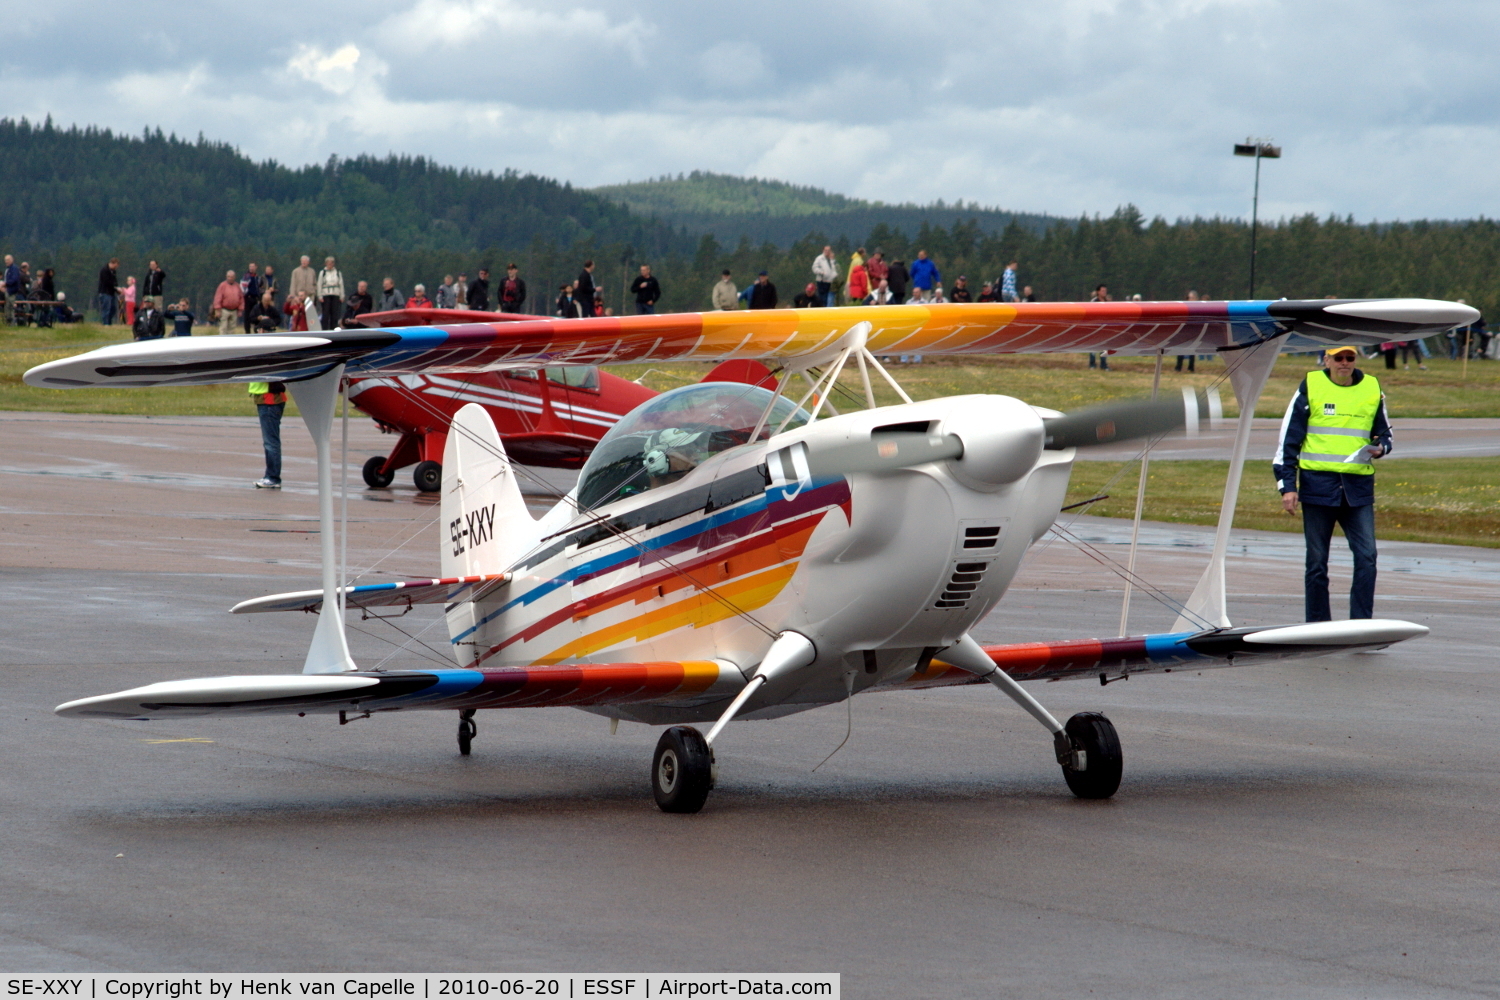 SE-XXY, 2004 Aviat Eagle II C/N 6628, Aviat Eagle taxying on the platform of Hultsfred airfield, Sweden.